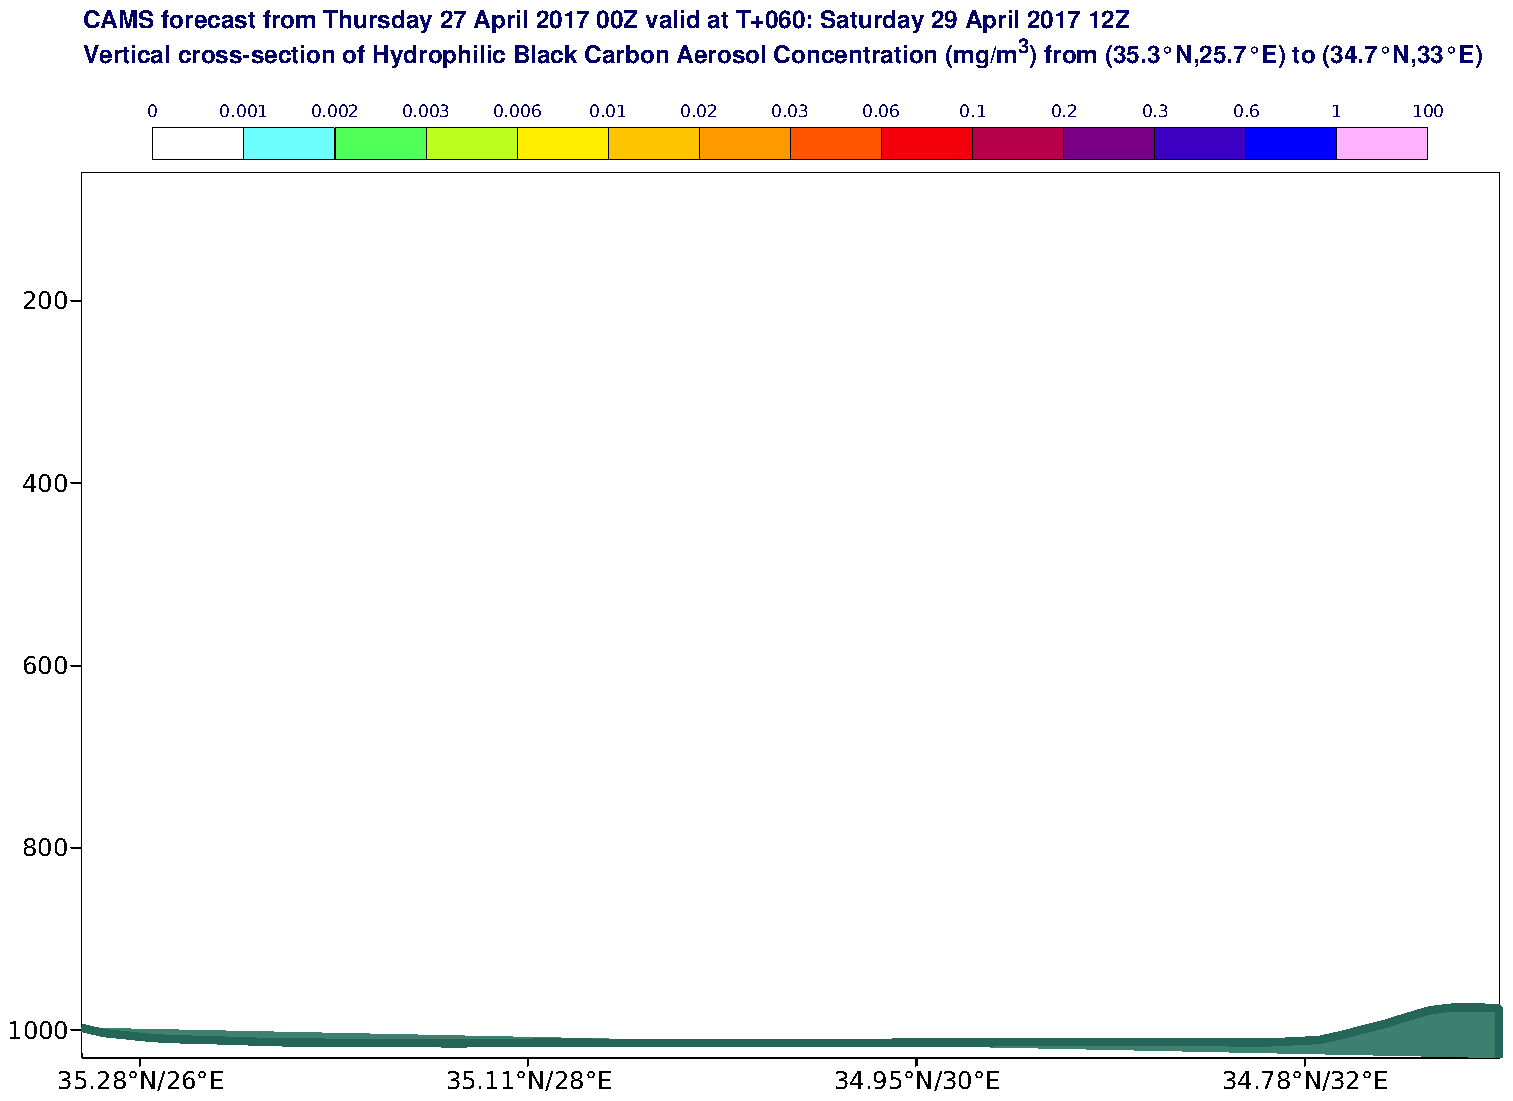 Vertical cross-section of Hydrophilic Black Carbon Aerosol Concentration (mg/m3) valid at T60 - 2017-04-29 12:00